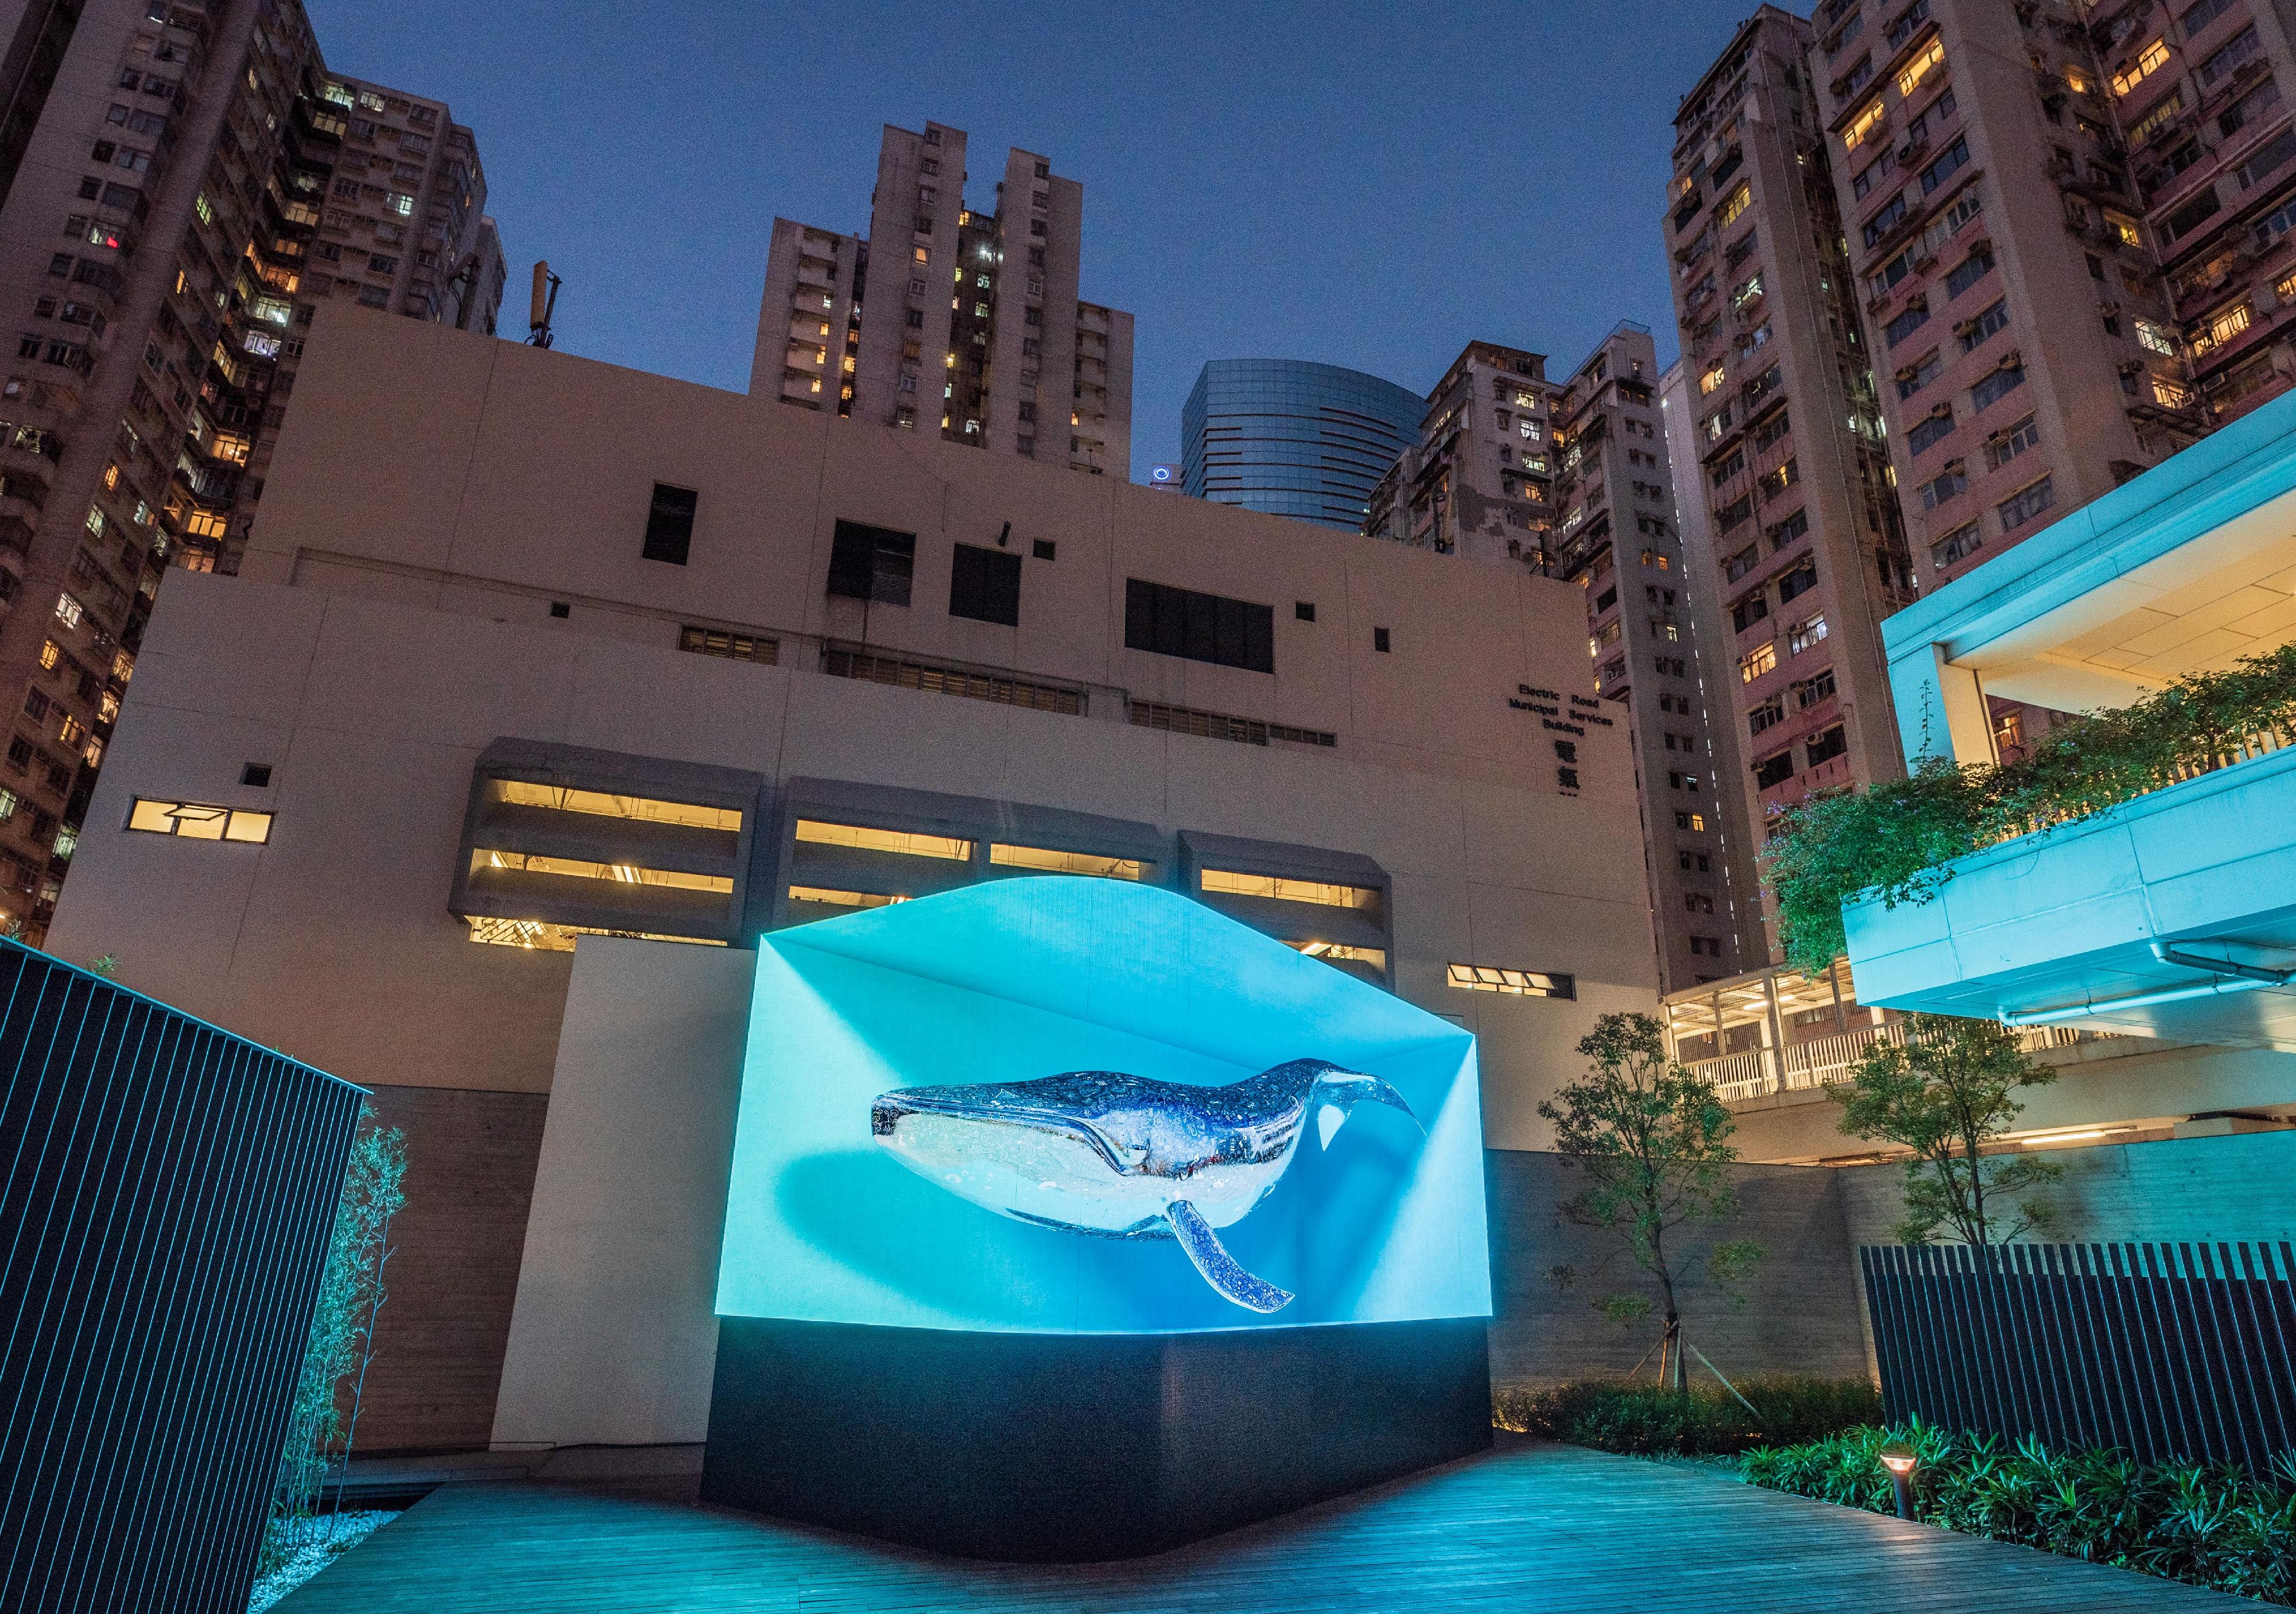 The new extension of the Oil Street Art Space will be open to the public tomorrow (May 24). Photo shows Korean art group d'strict's three-dimensional digital art work "Whale", which gives the audience an immersive, larger-than-life impression of nature, in the "d'strict Remix" exhibition.